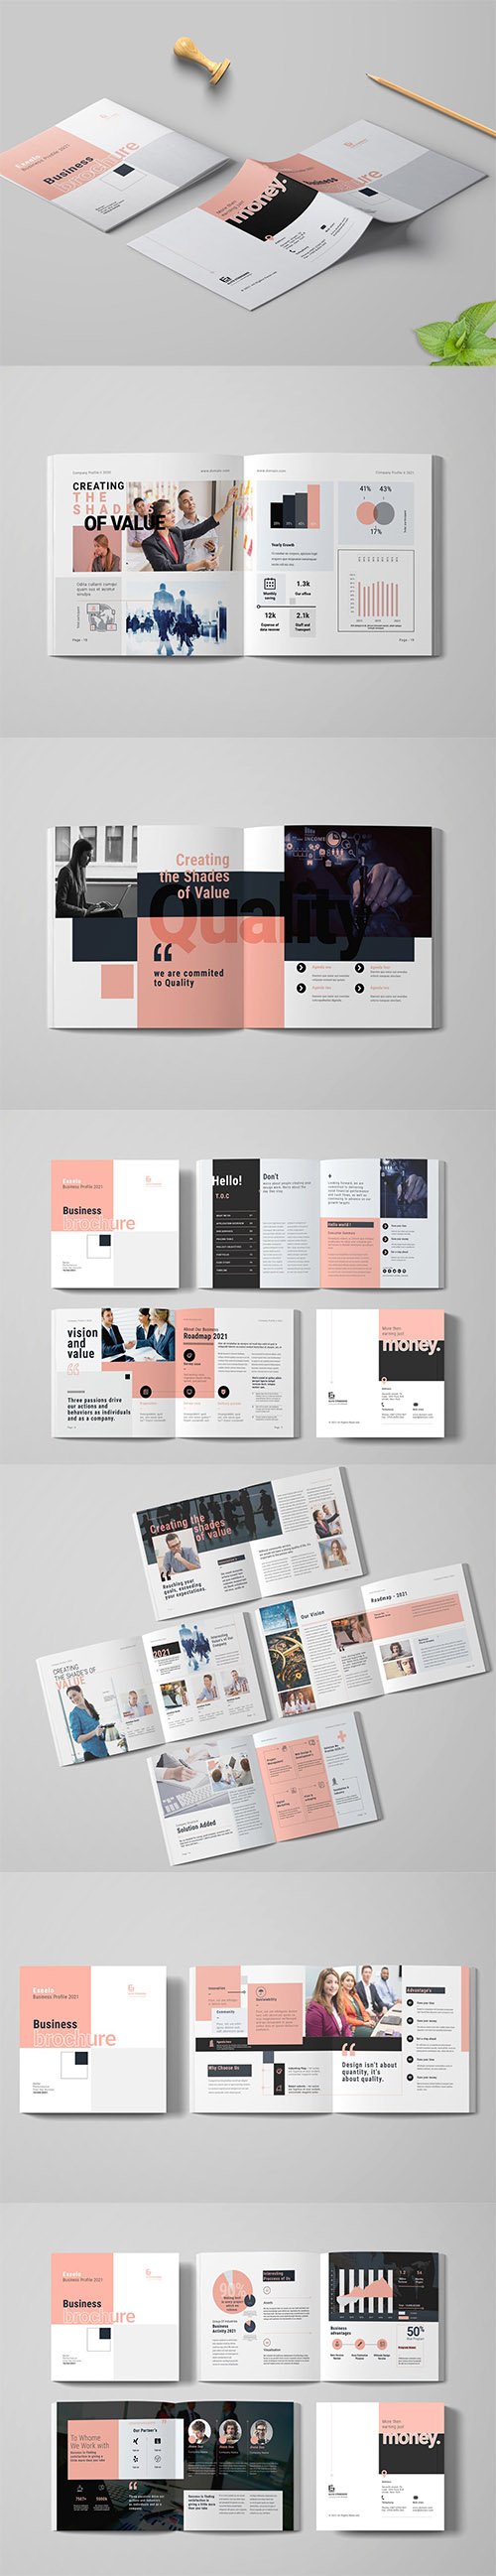 Square Business Brochure - Brochure Templates - Free PSD Templates